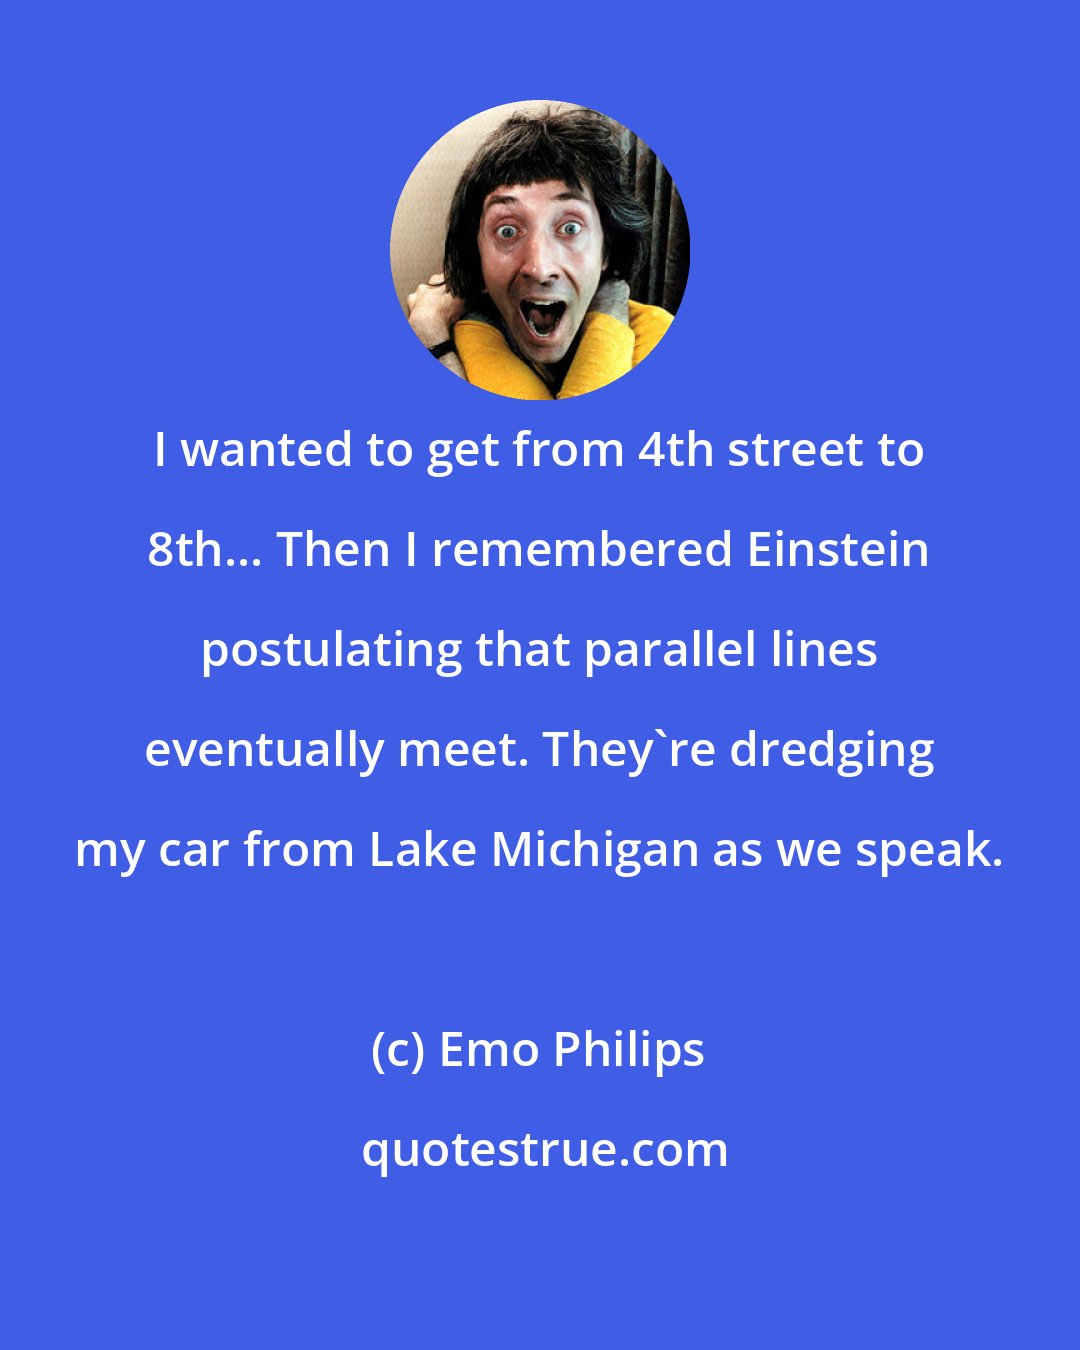 Emo Philips: I wanted to get from 4th street to 8th... Then I remembered Einstein postulating that parallel lines eventually meet. They're dredging my car from Lake Michigan as we speak.